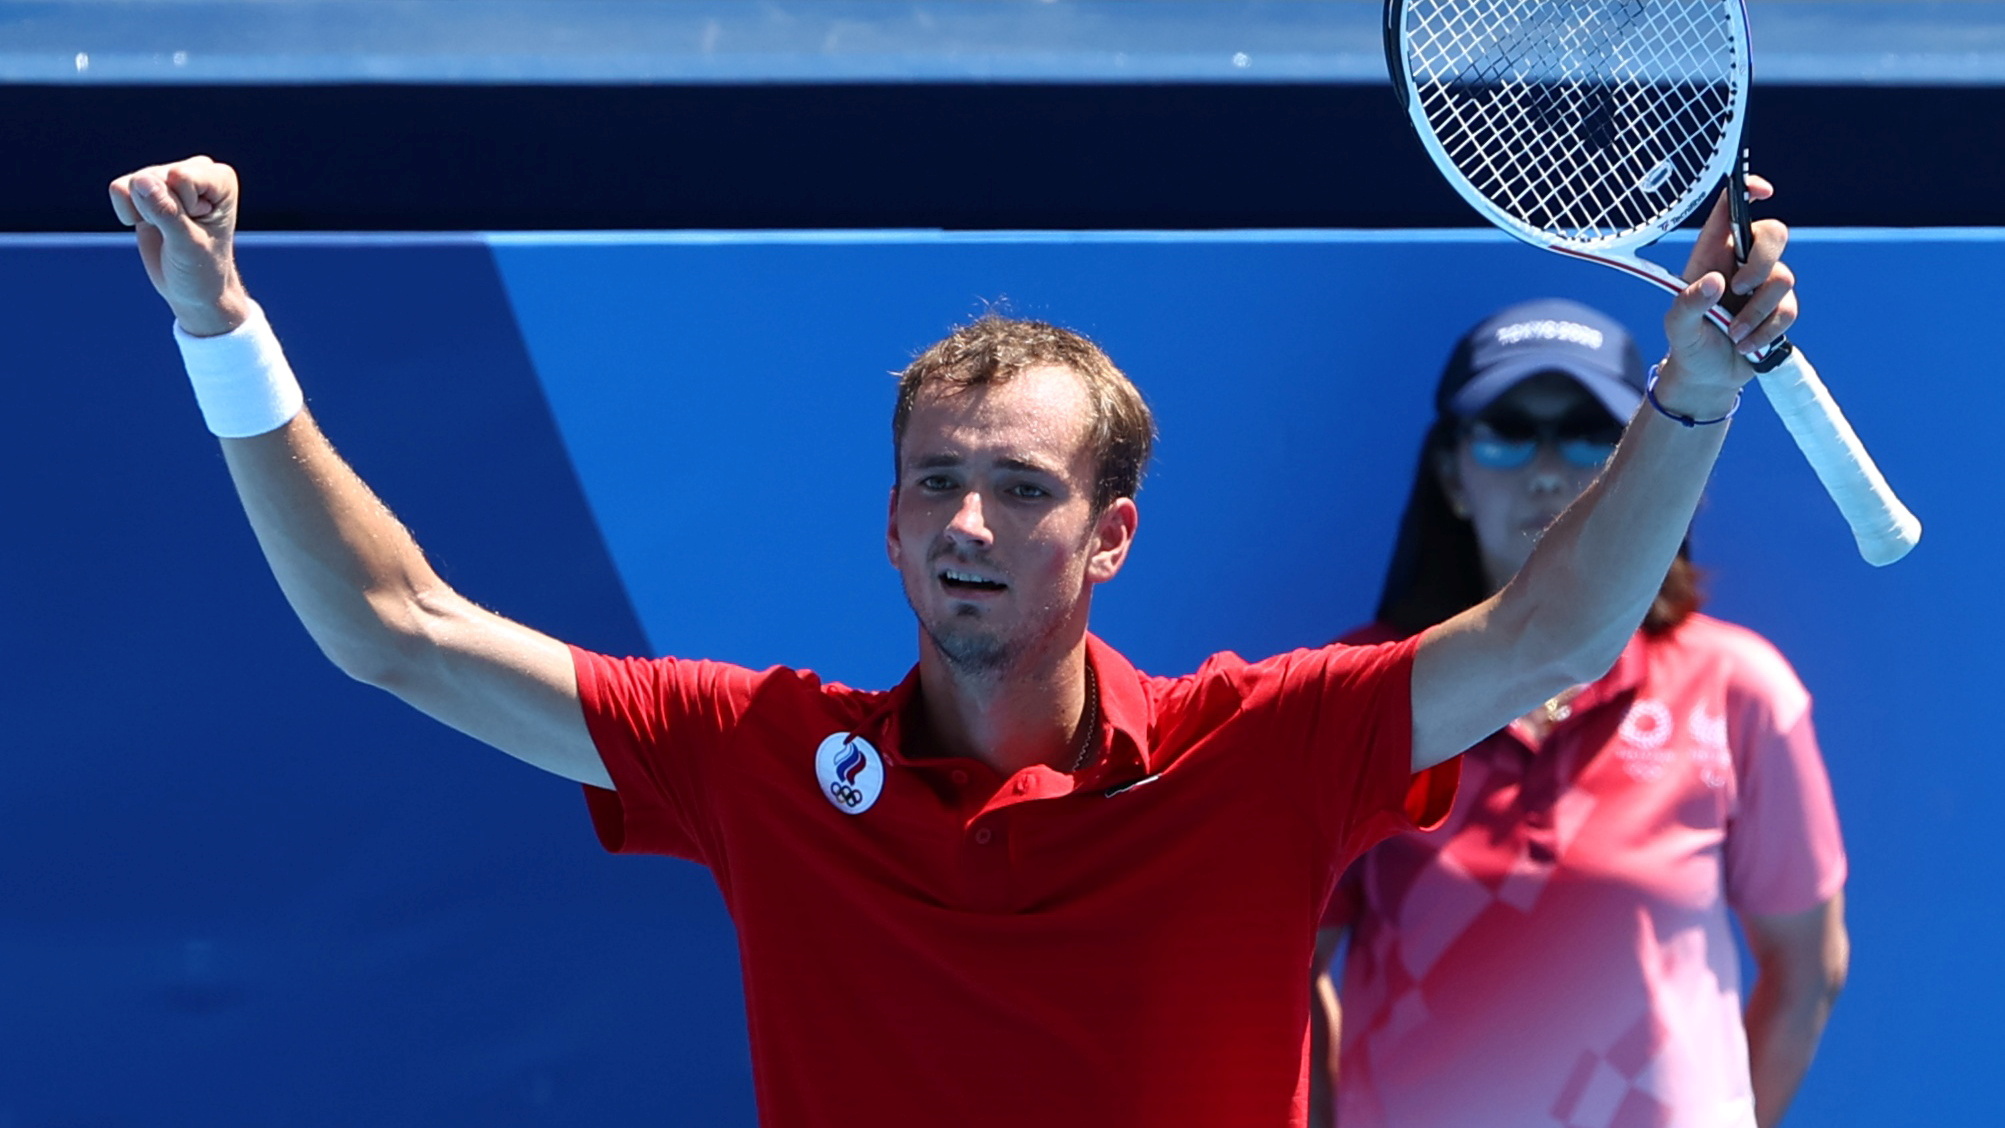 Daniil Medvedev of the Russian Olympic Committee celebrates after winning his third round match against Fabio Fognini of Italy